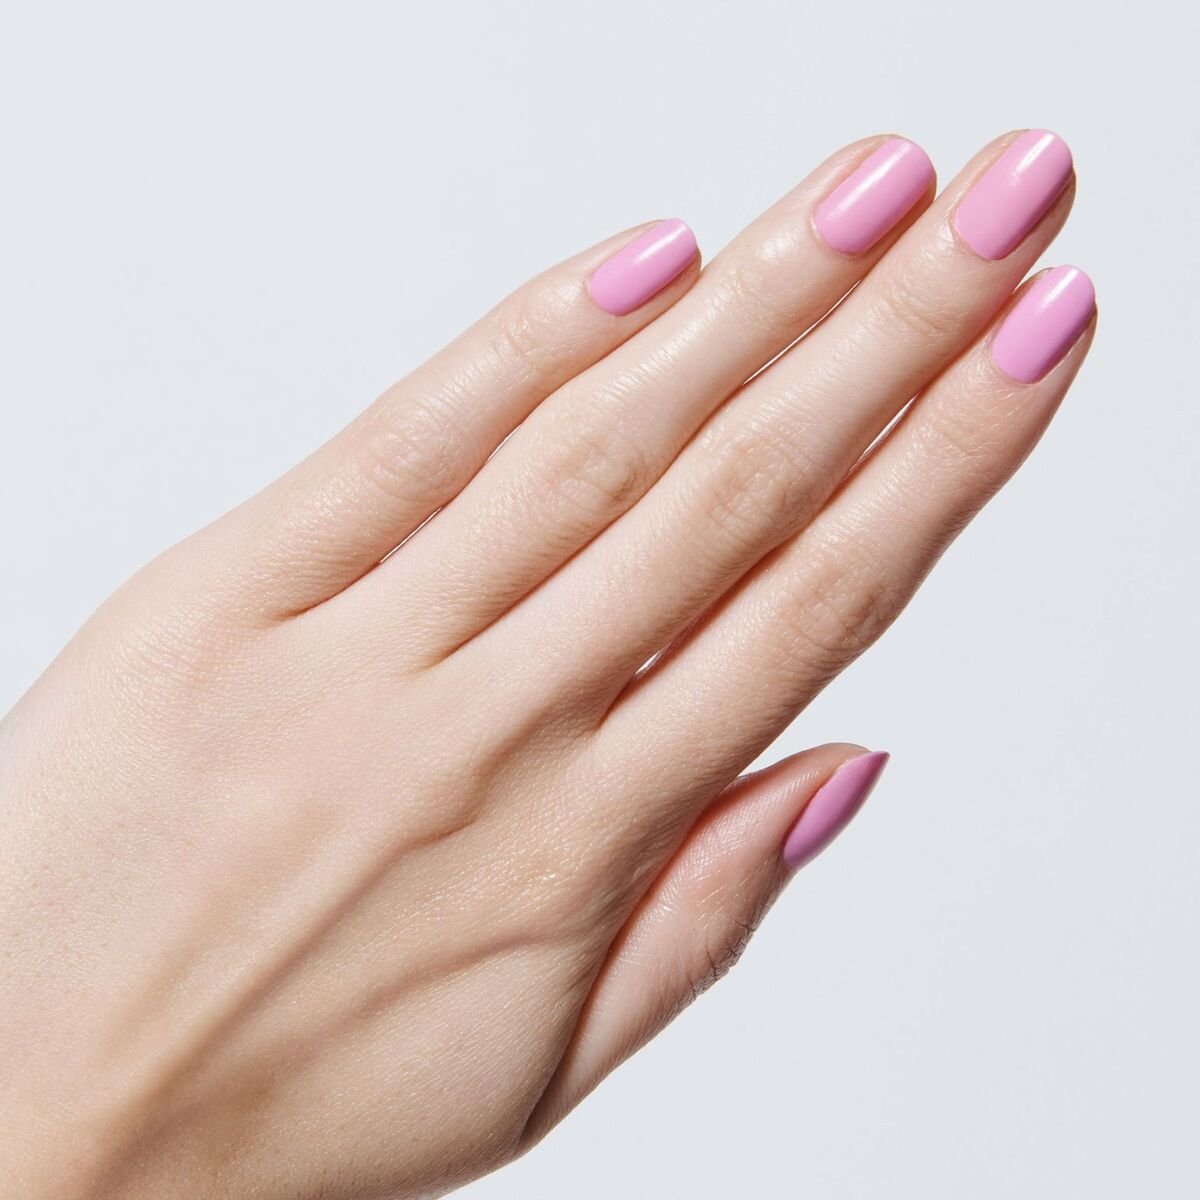 Nail Your At-Home Mani With These Pro Tips